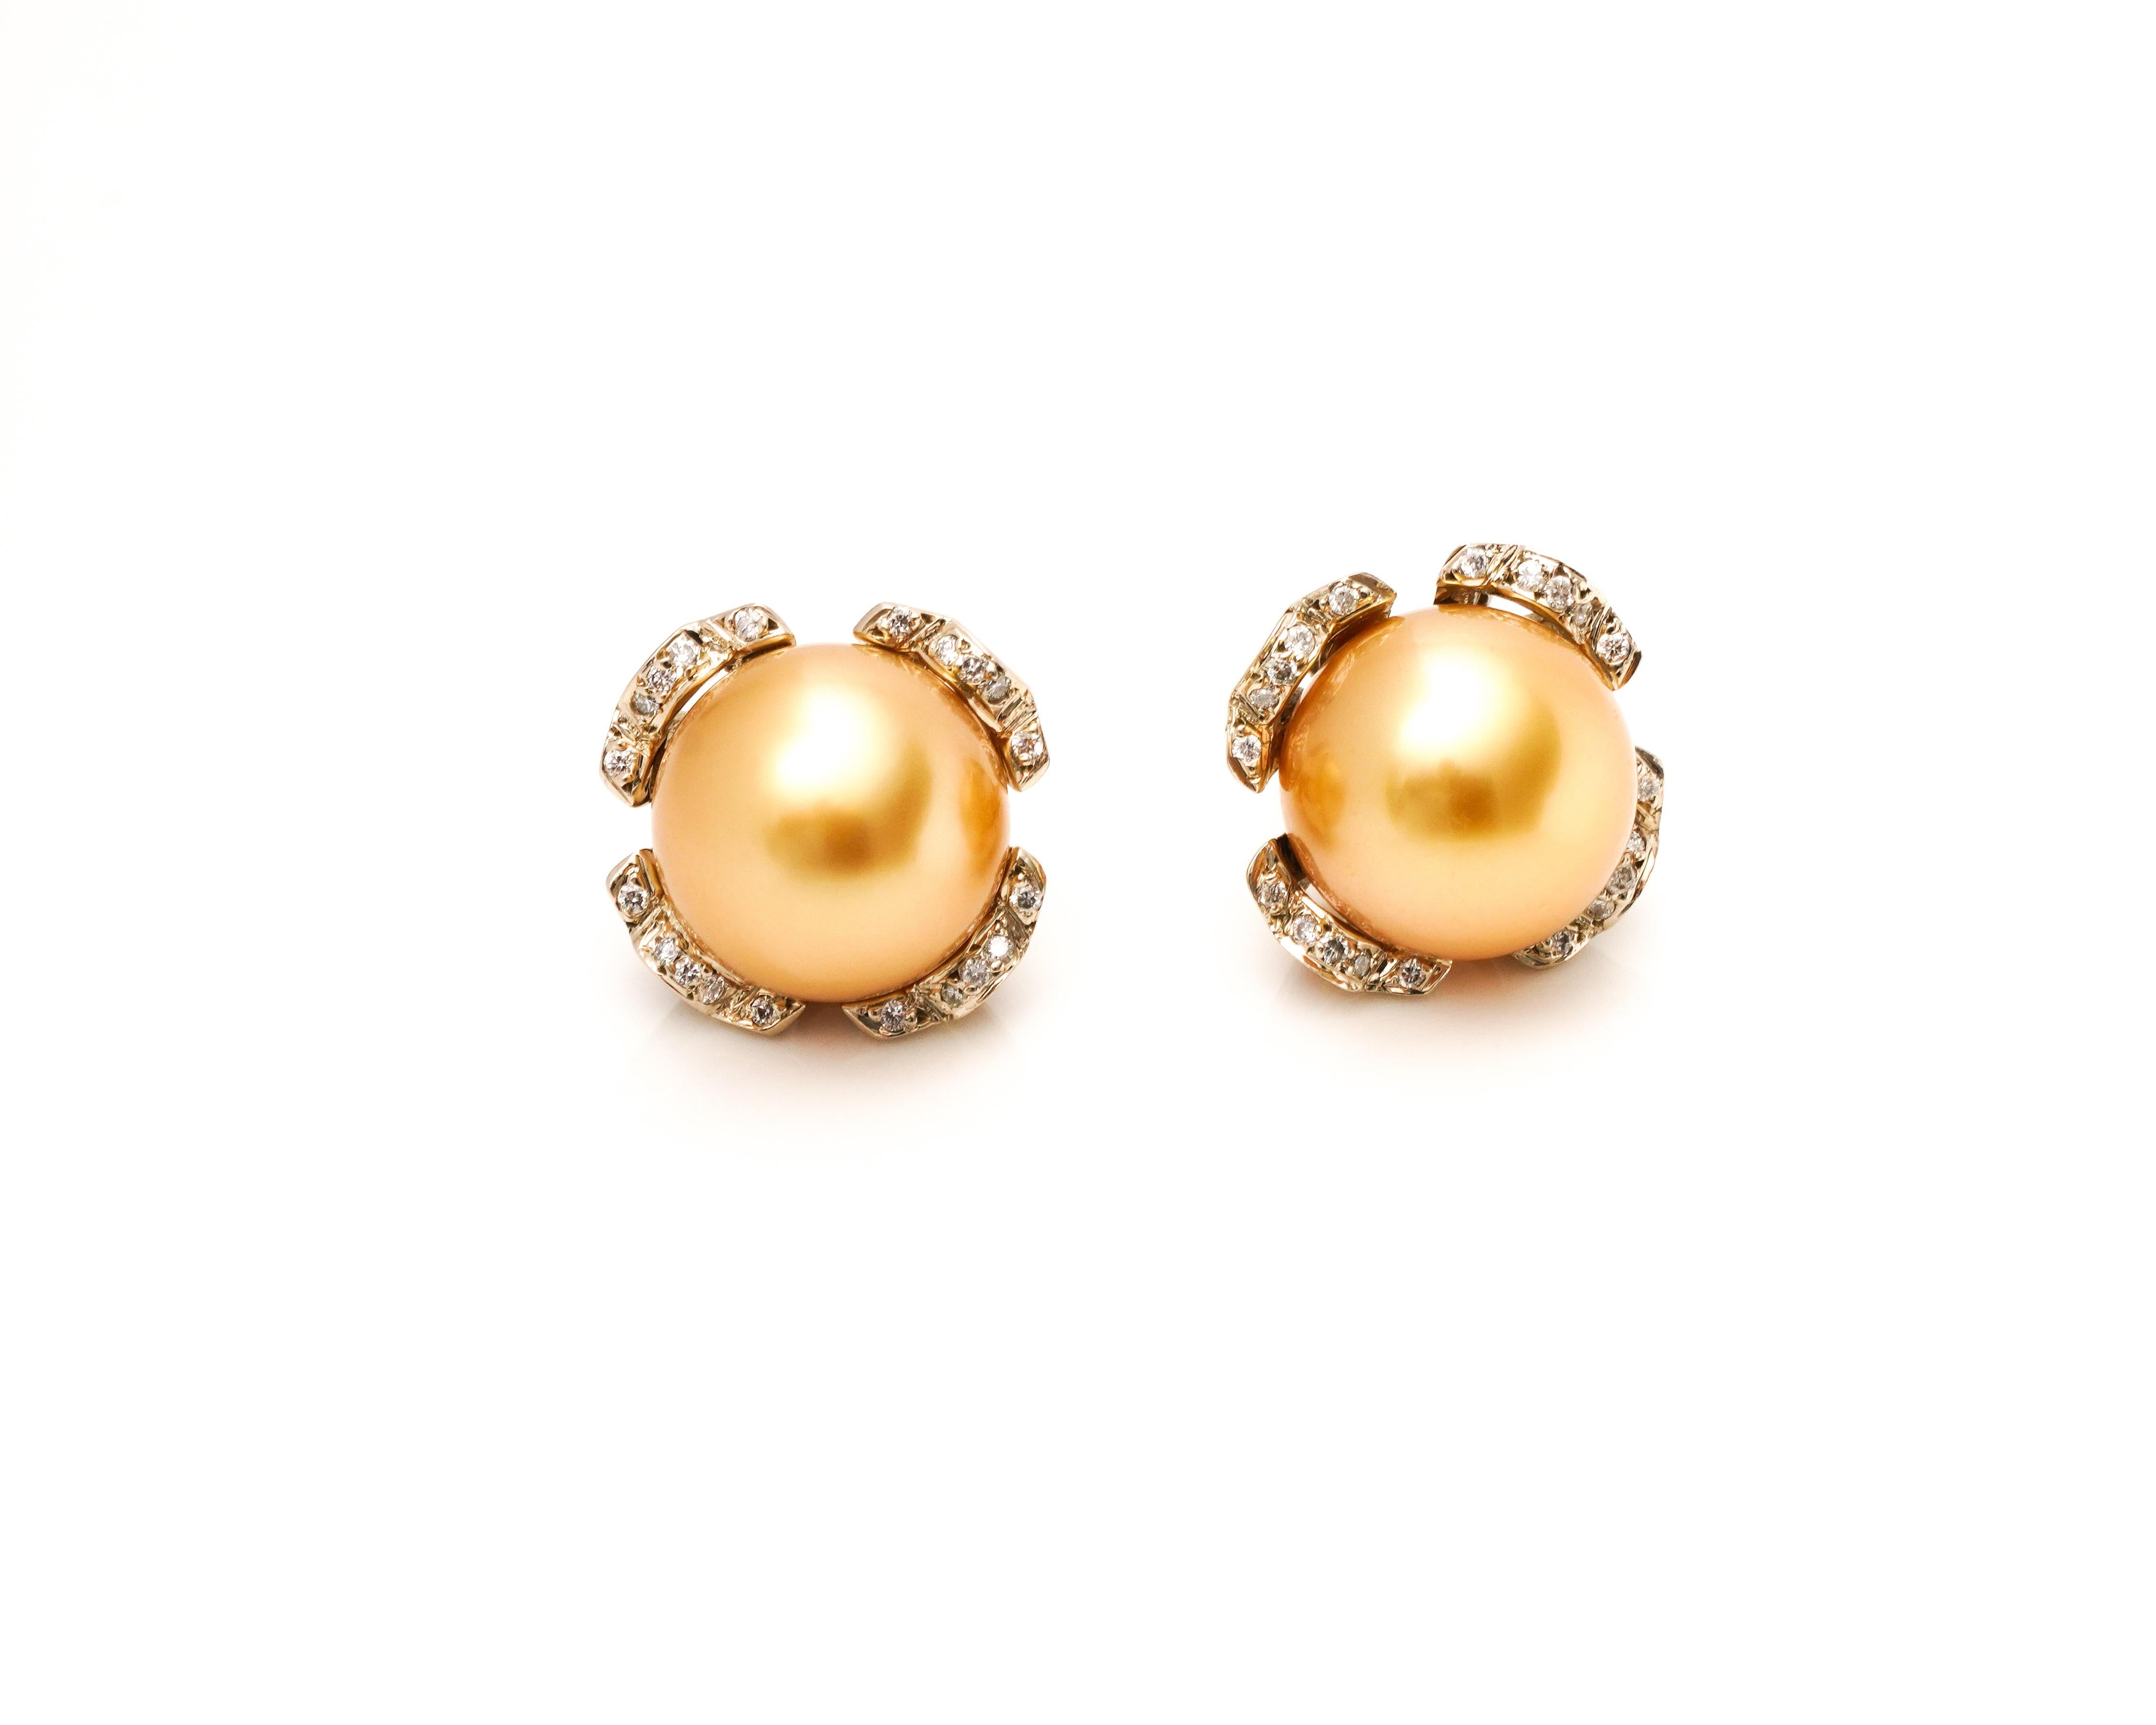 Earring Details:
Metal type: 18 karat White and Yellow Gold
Weight: 8.6 grams
Pearl: 11 millimeter each 

Diamond Basket Details:
This feature is removable. The earrings can be worn alone or as pearl studs in diamond jackets.
Cut: Round
Color: